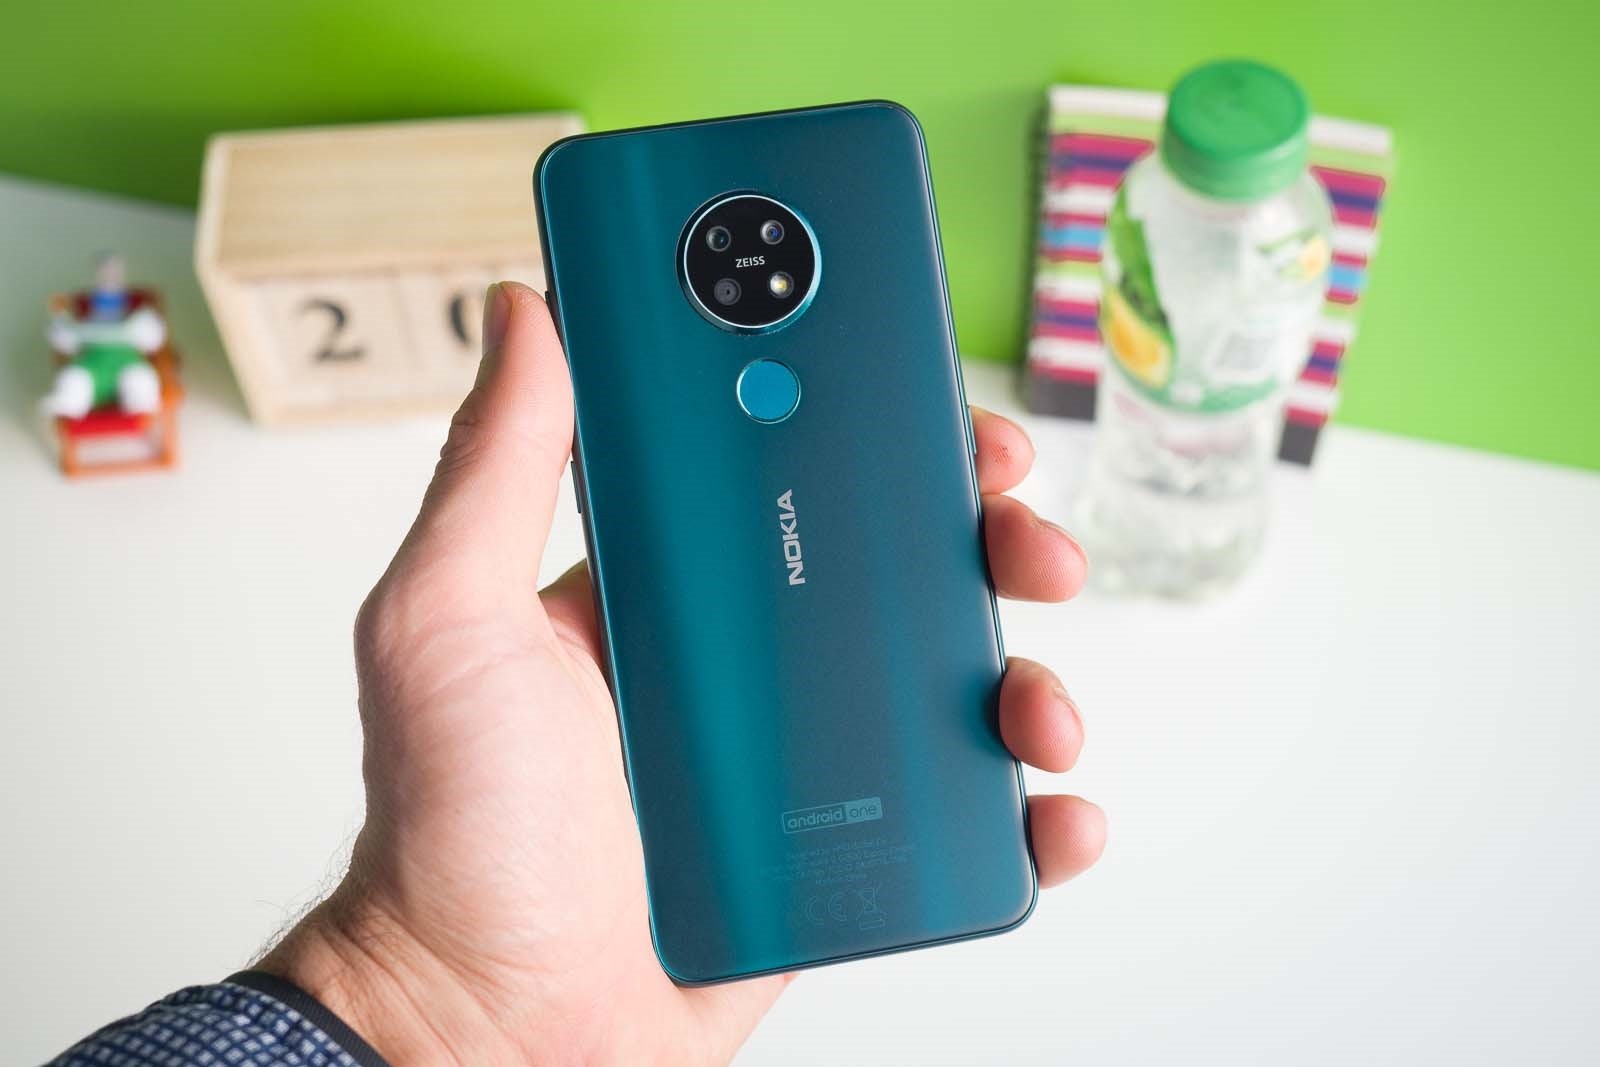 This new Nokia smartphone is being liked a lot, know its features